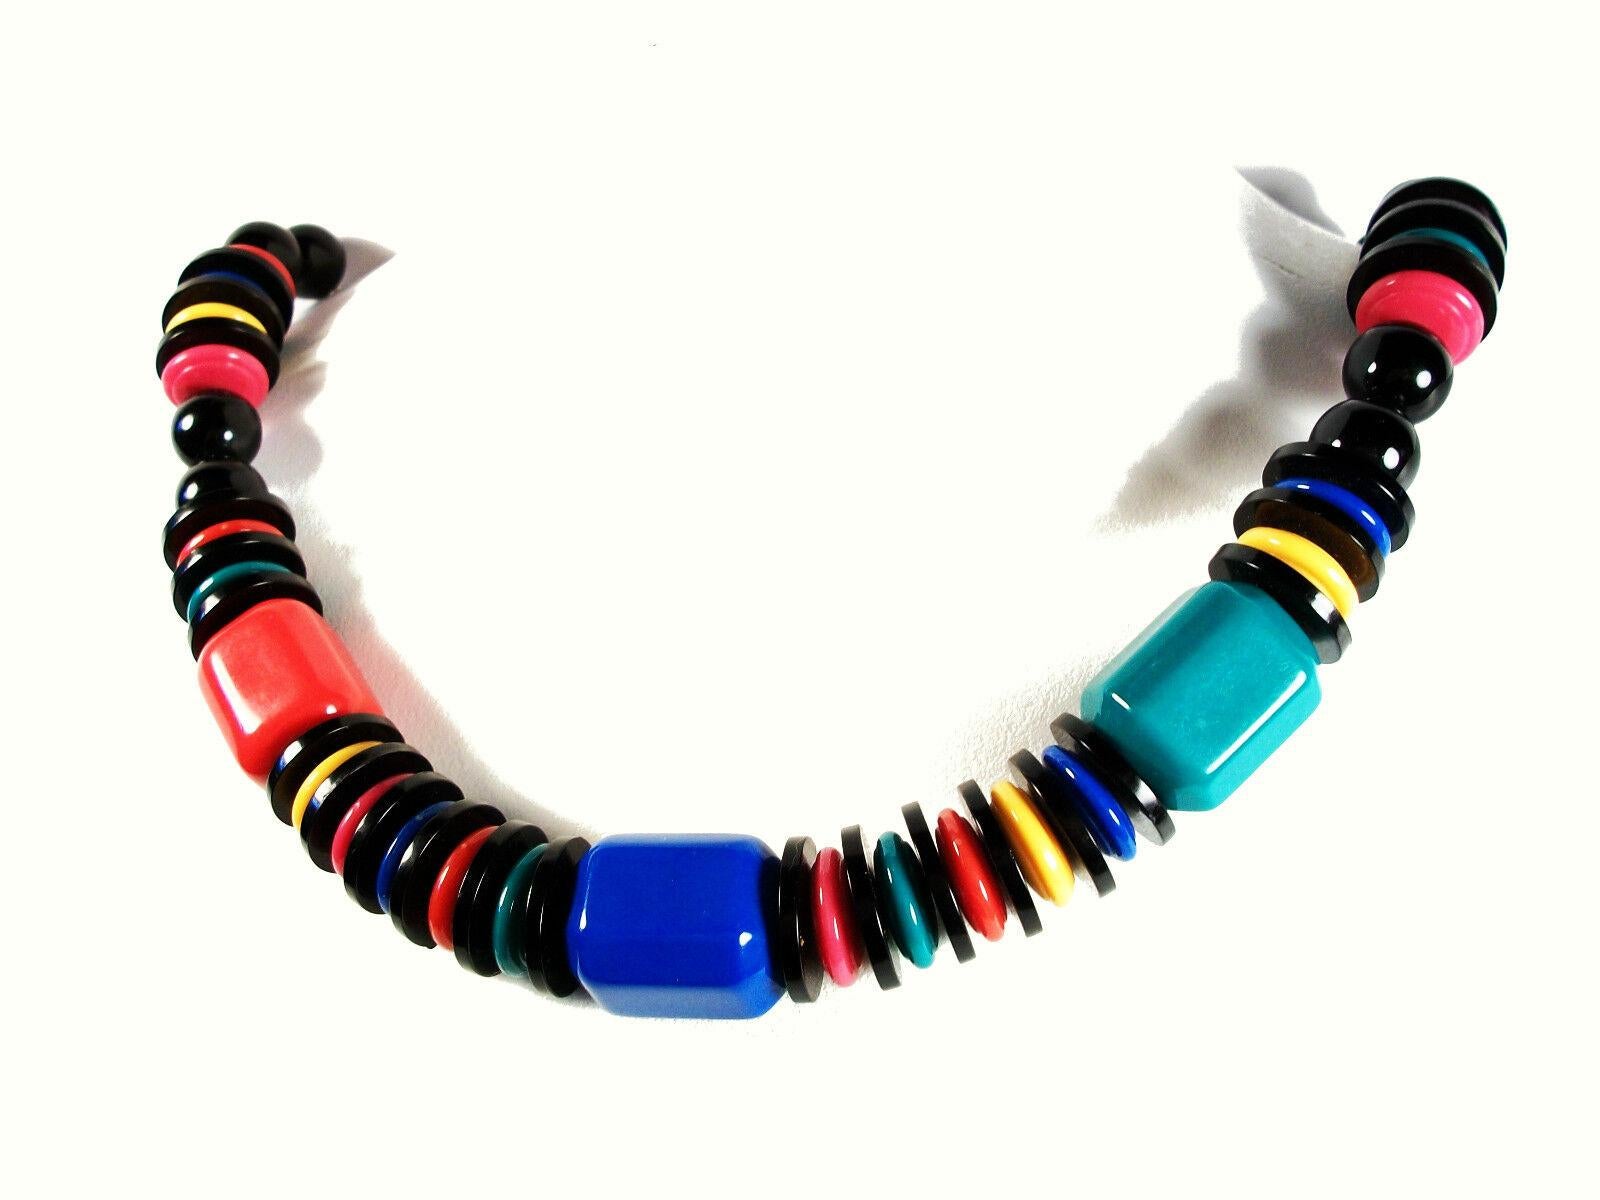 Vintage Multi-color & Black Acrylic Bead Necklace - Unsigned - Circa 1980's For Sale 1